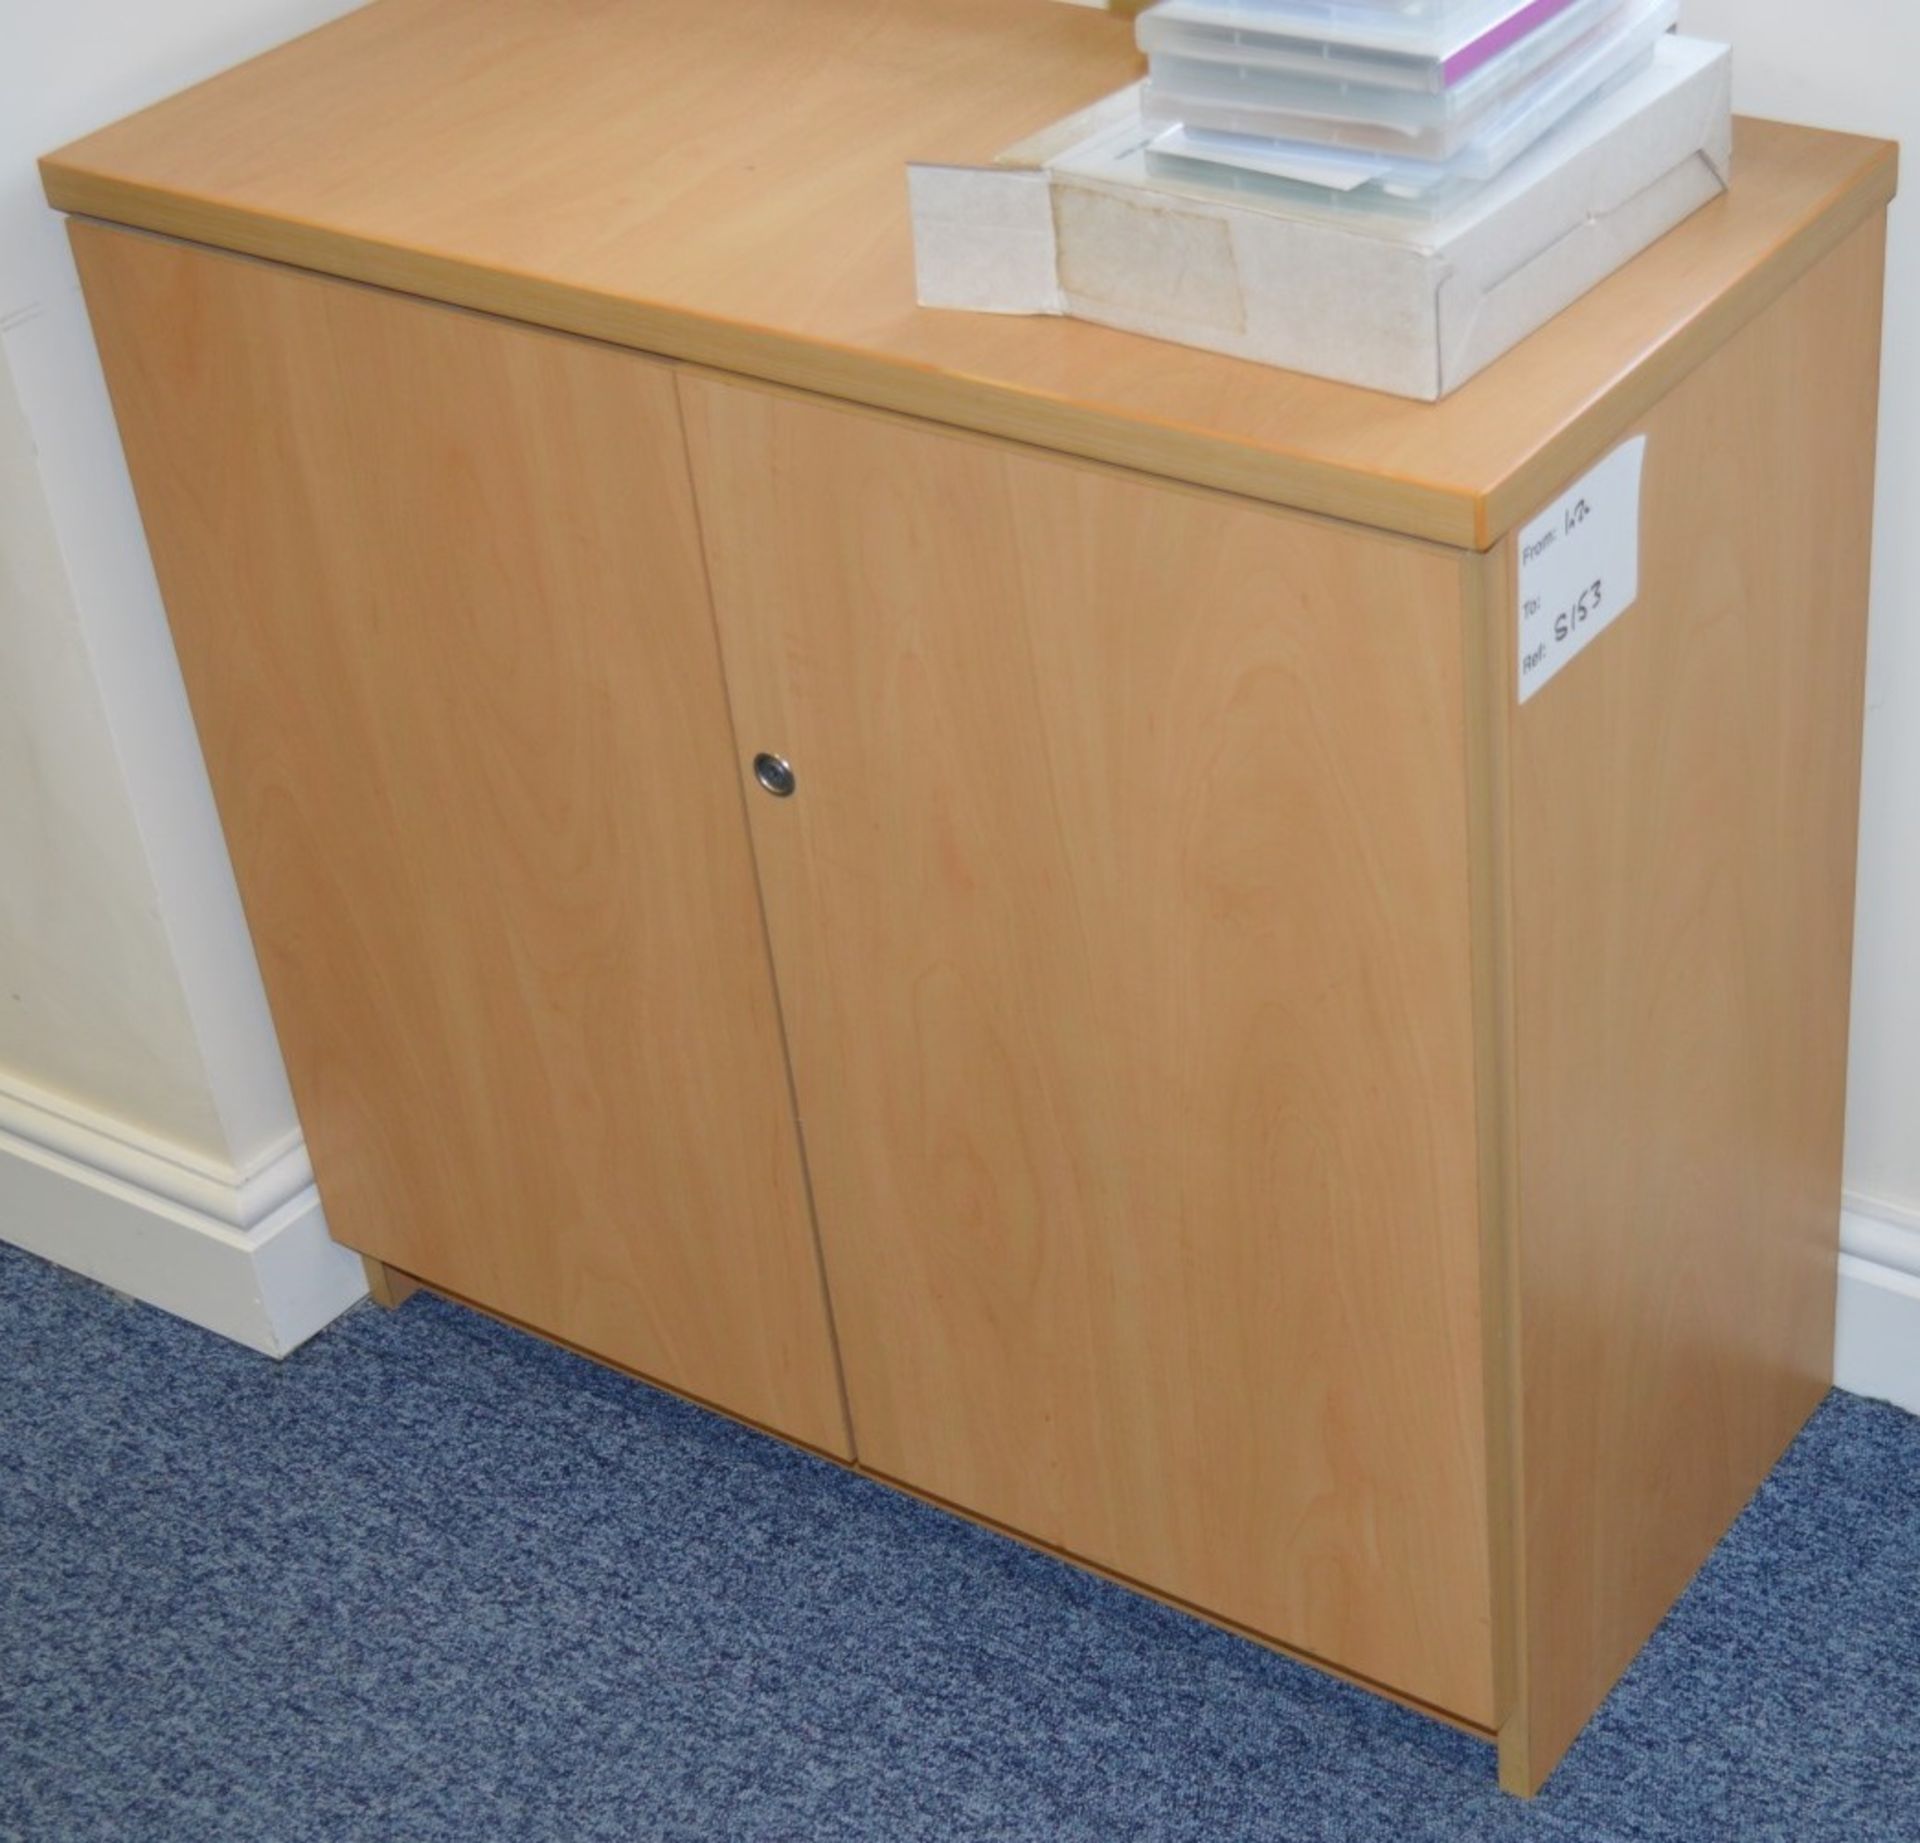 4 x Beech Office Storage Cabinets With Adjustable Internal Shelves - CL300 - Ref S153 - H75 x W80 - Image 2 of 2